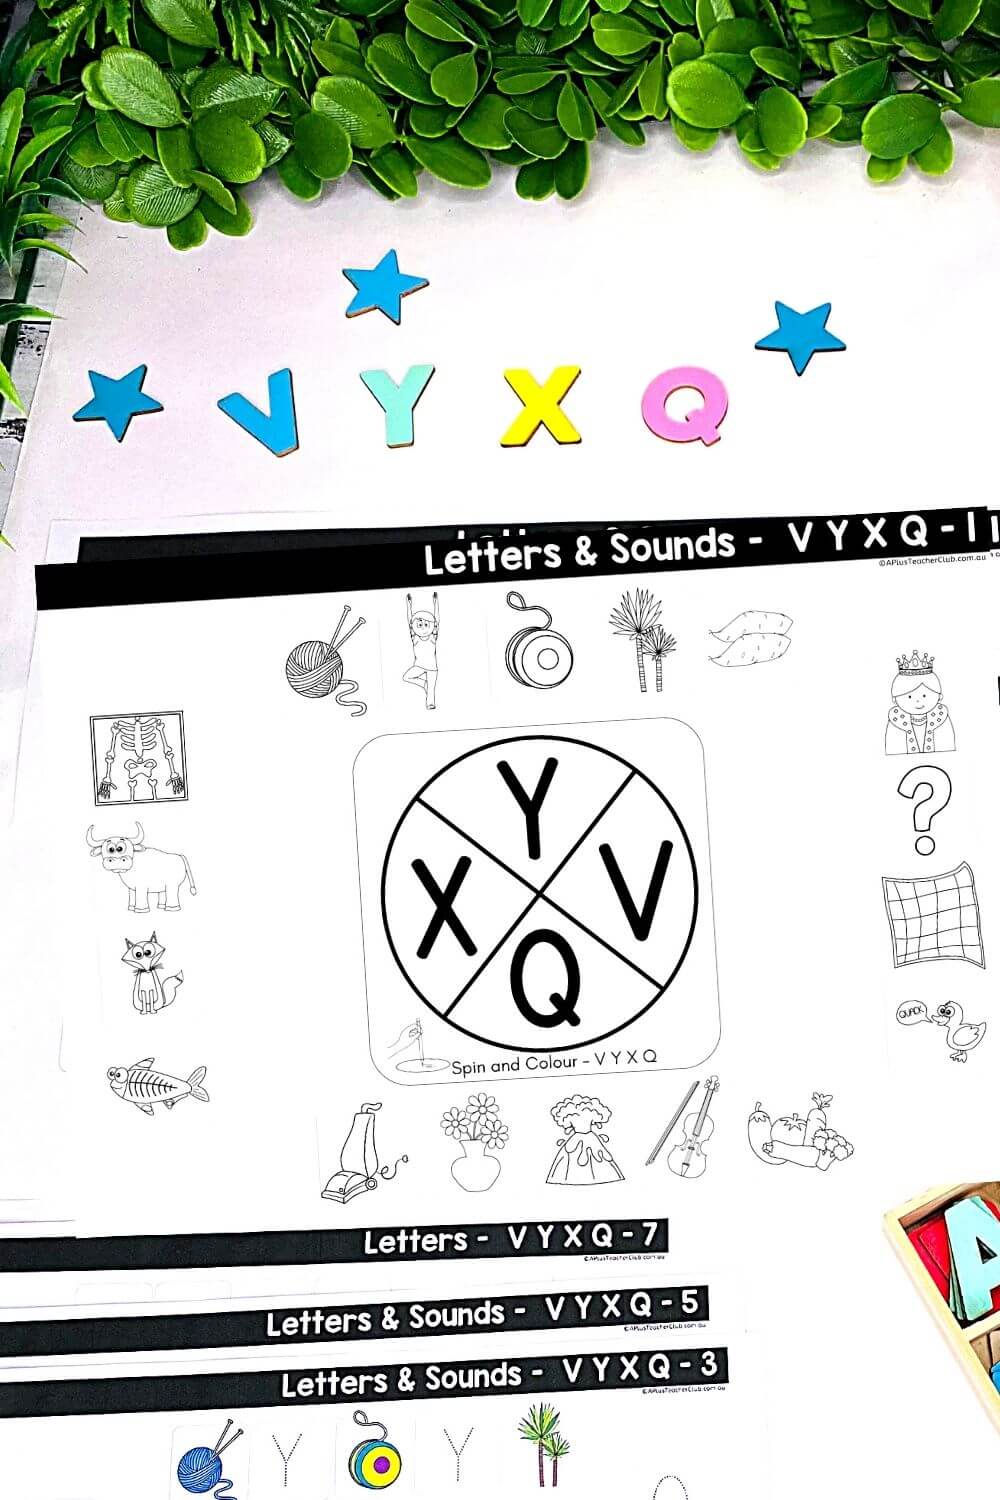 VYXQ Spin & Colour Worksheets (B&W UPPER CASE)